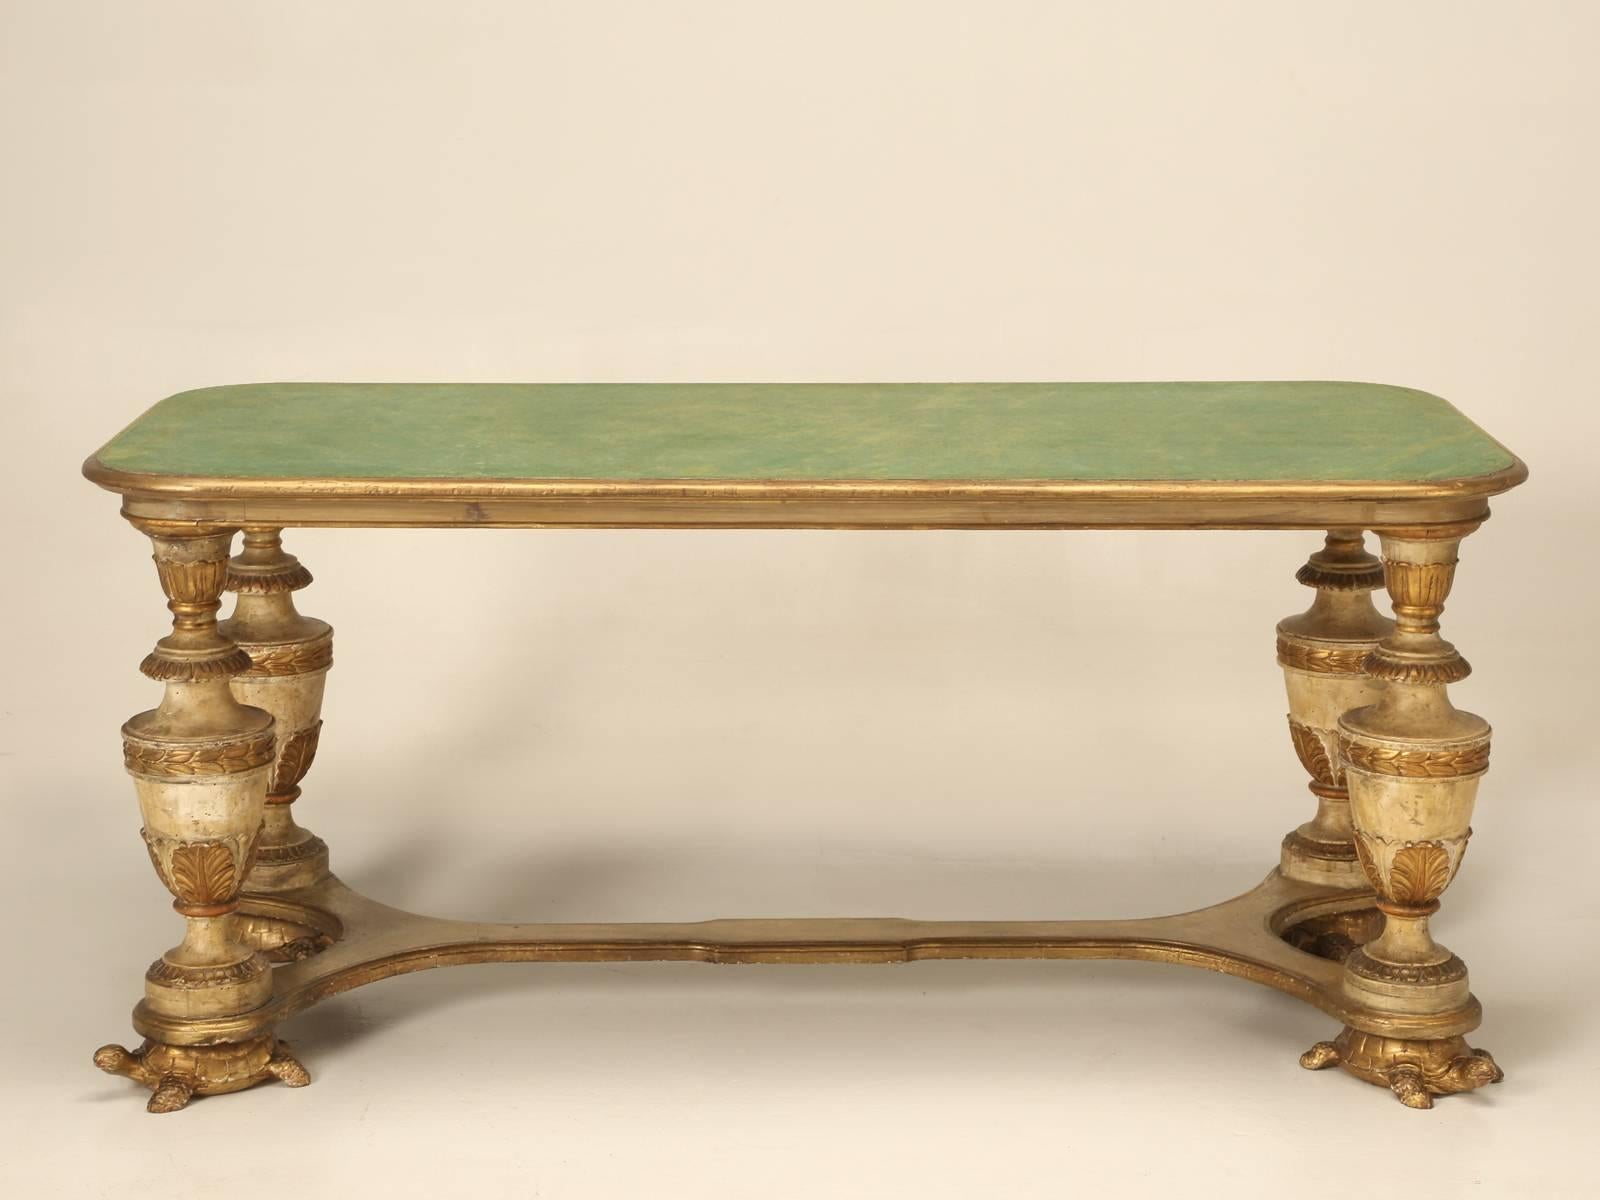 Mid-19th Century Italian Desk, or Library Table with Turtles